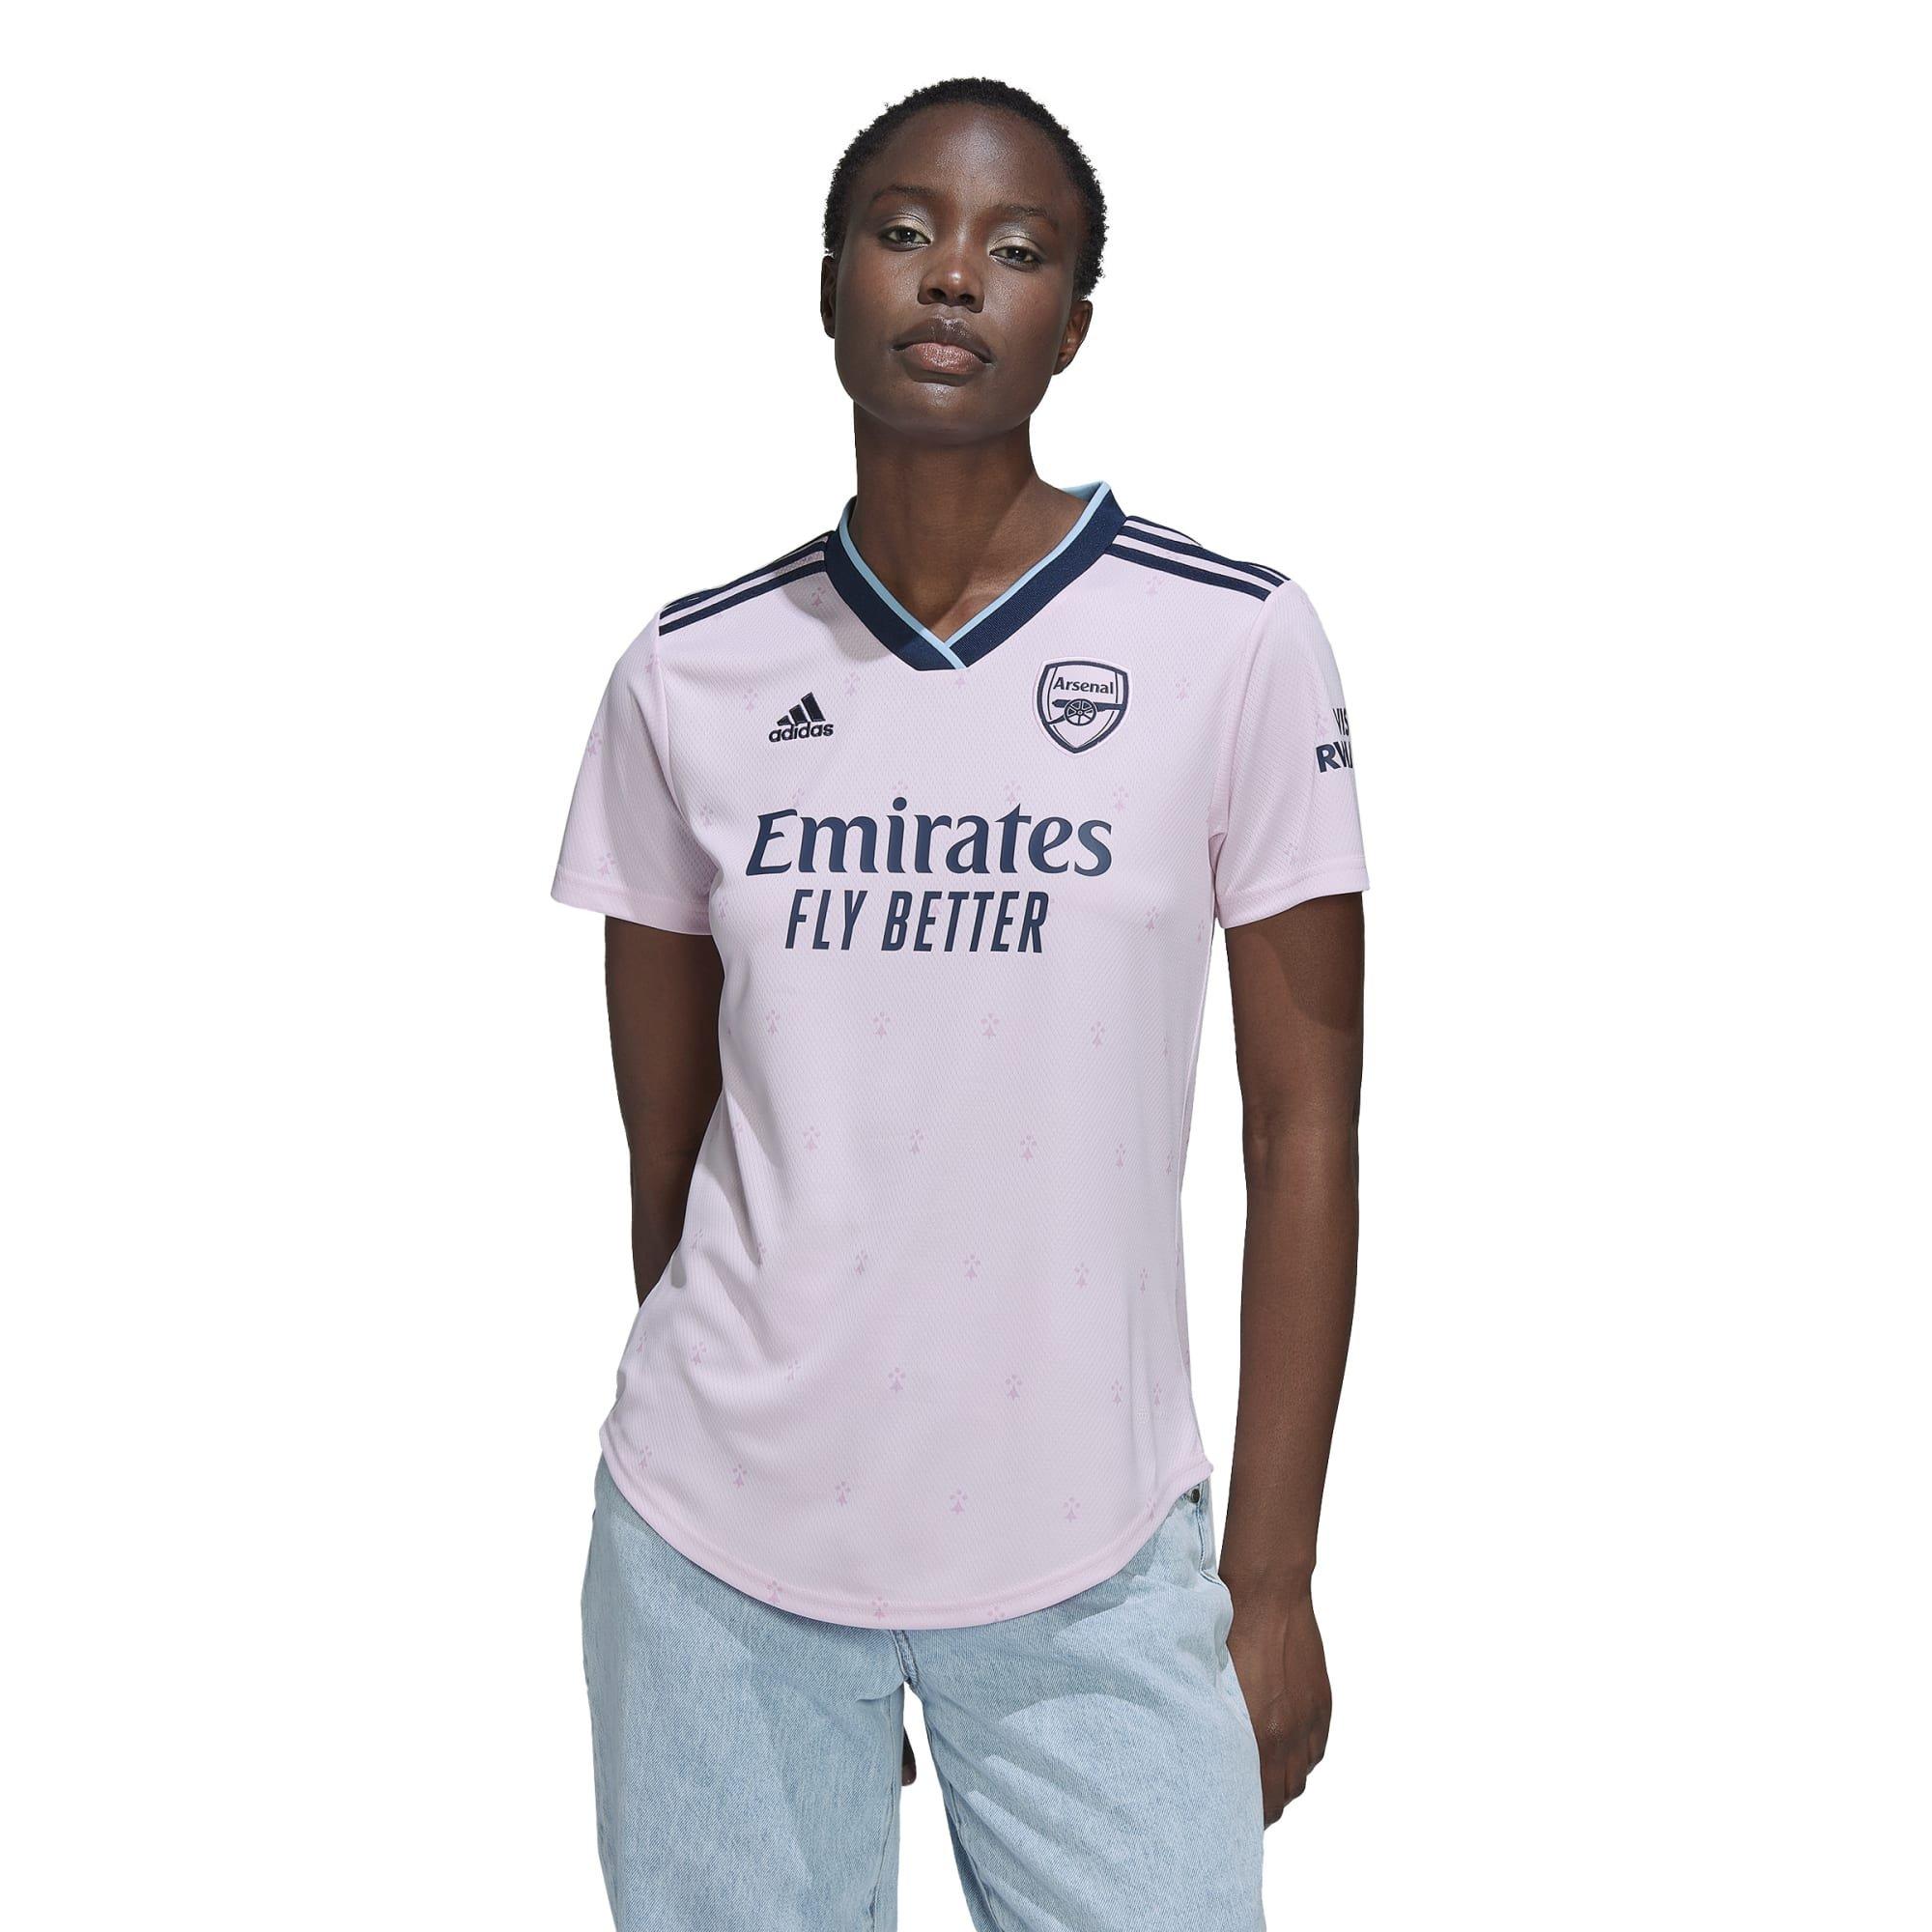 The Arsenal 22/23 Women's Kit | Official Online Store